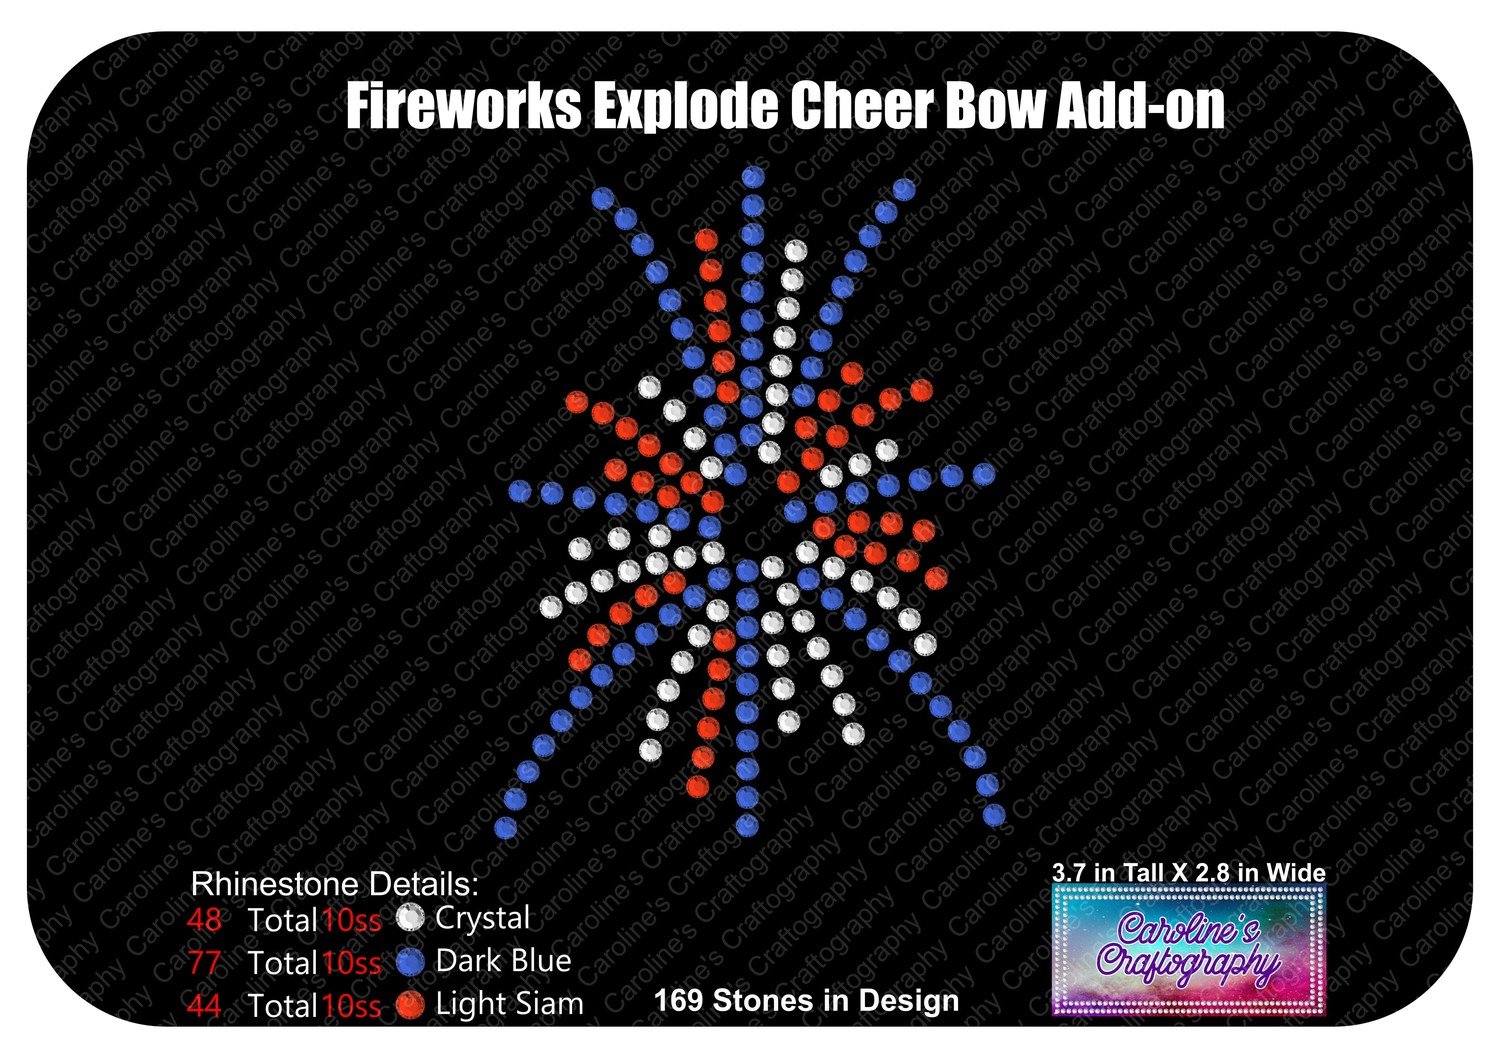 Fireworks Exploding Cheer Bow Add-on Stone